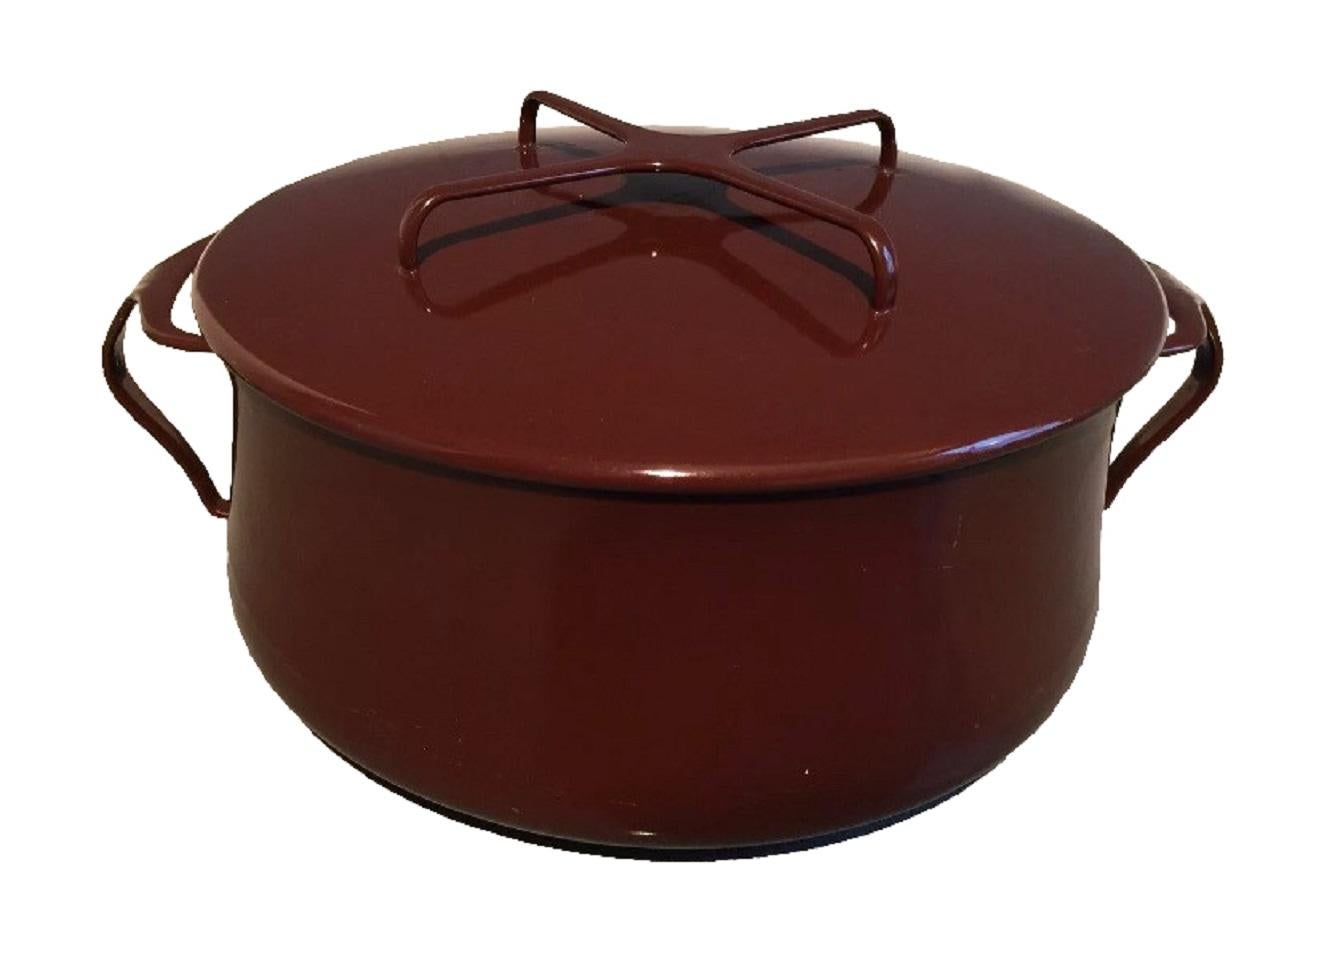 A Dansk Kobensyle Dutch oven / stock pot and lid in brown with white interior.  Steel with enamel finish. France, circa 1960.

Stamped on underside of pot; 